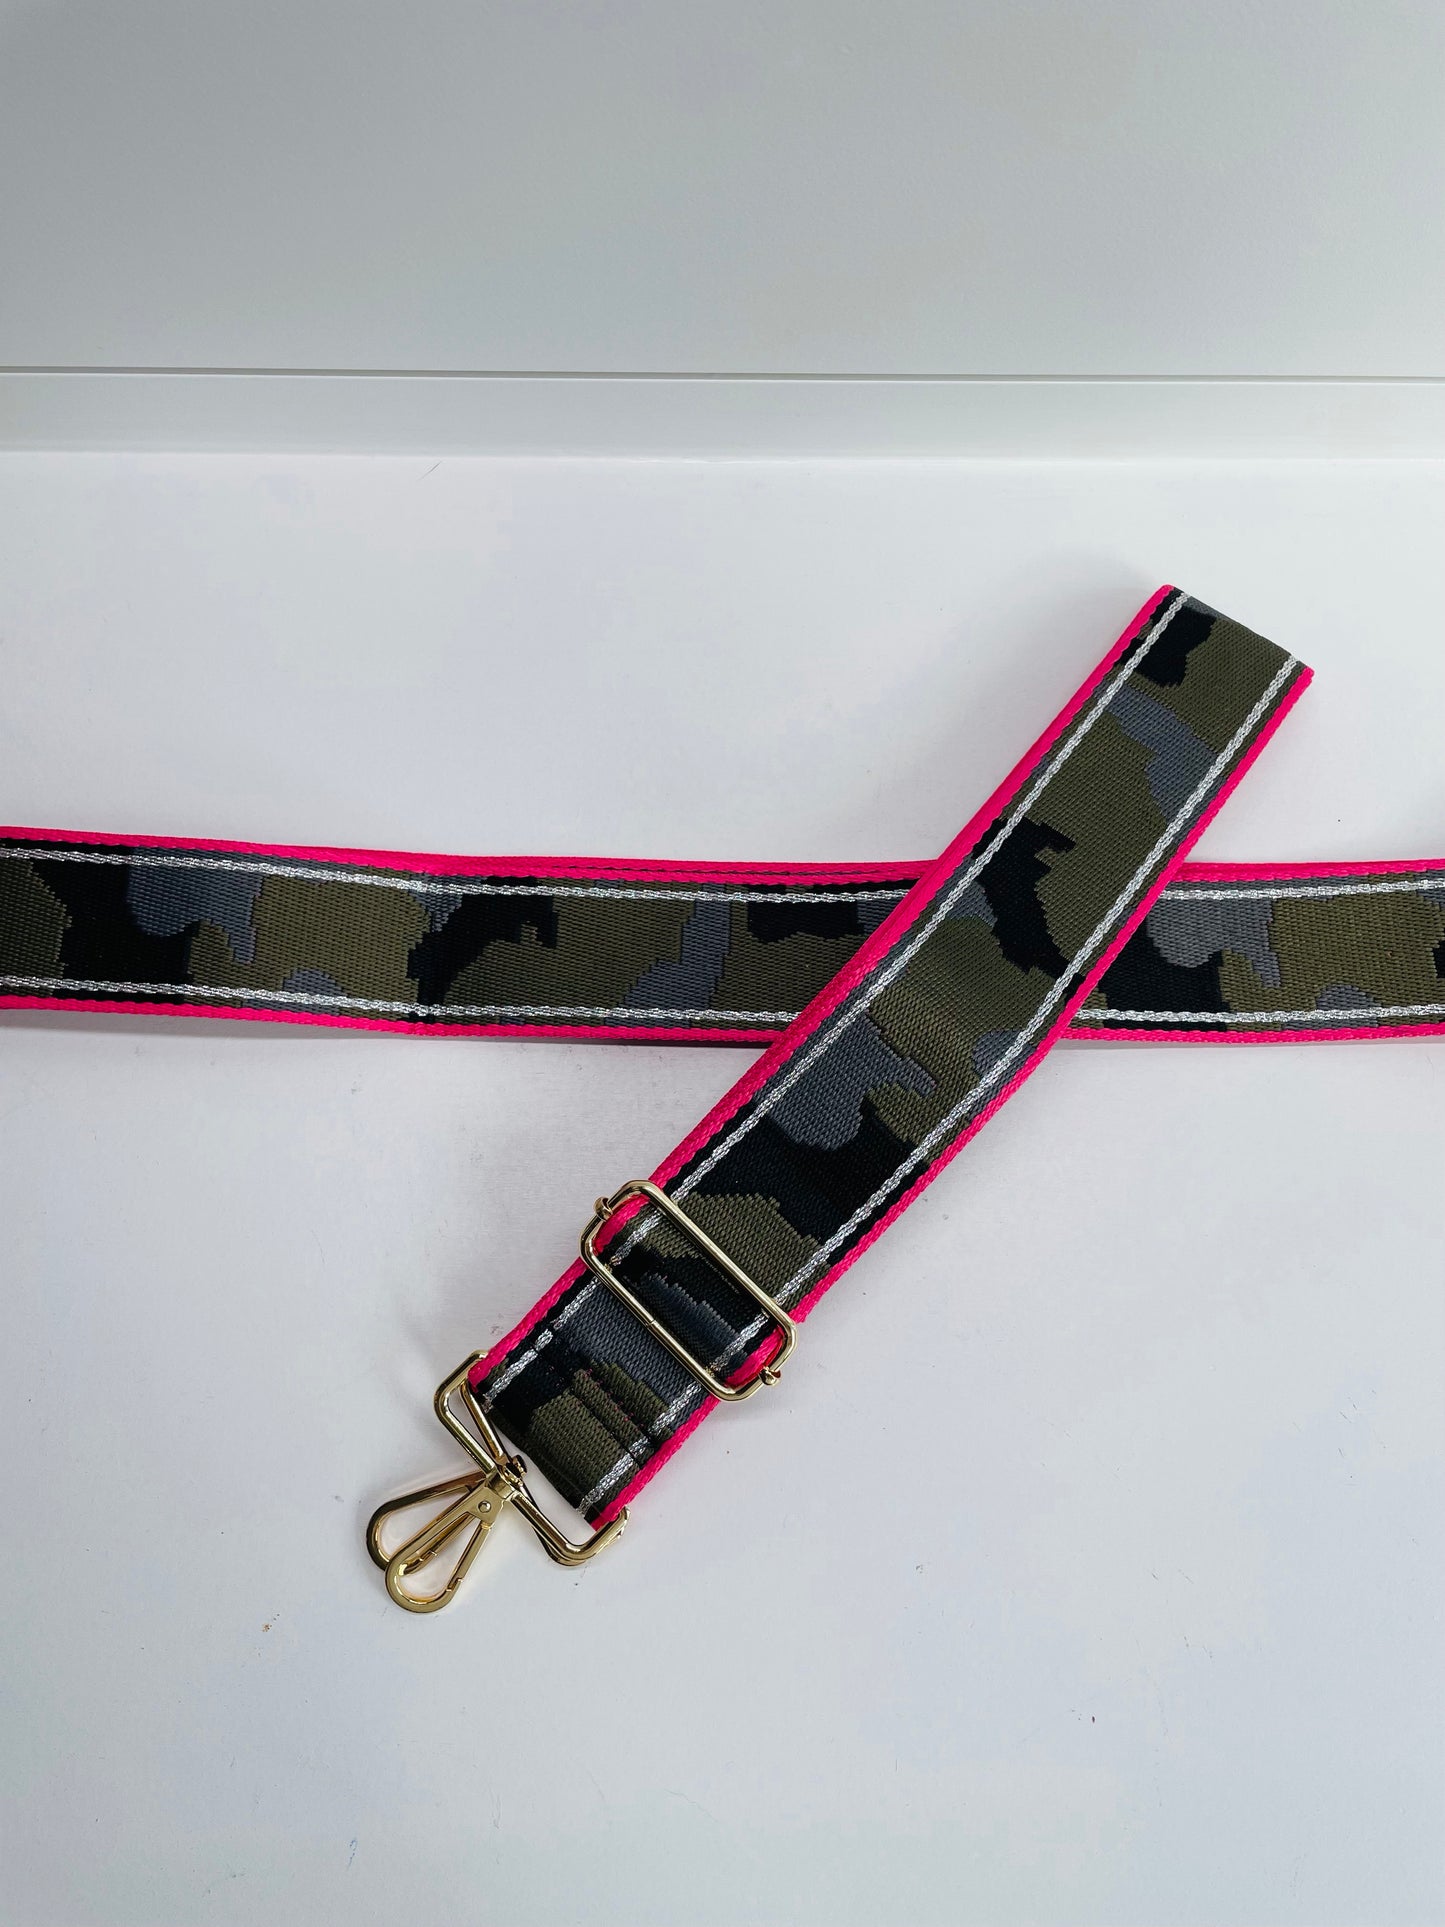 Hot Pink & Camouflage Crossbody Strap